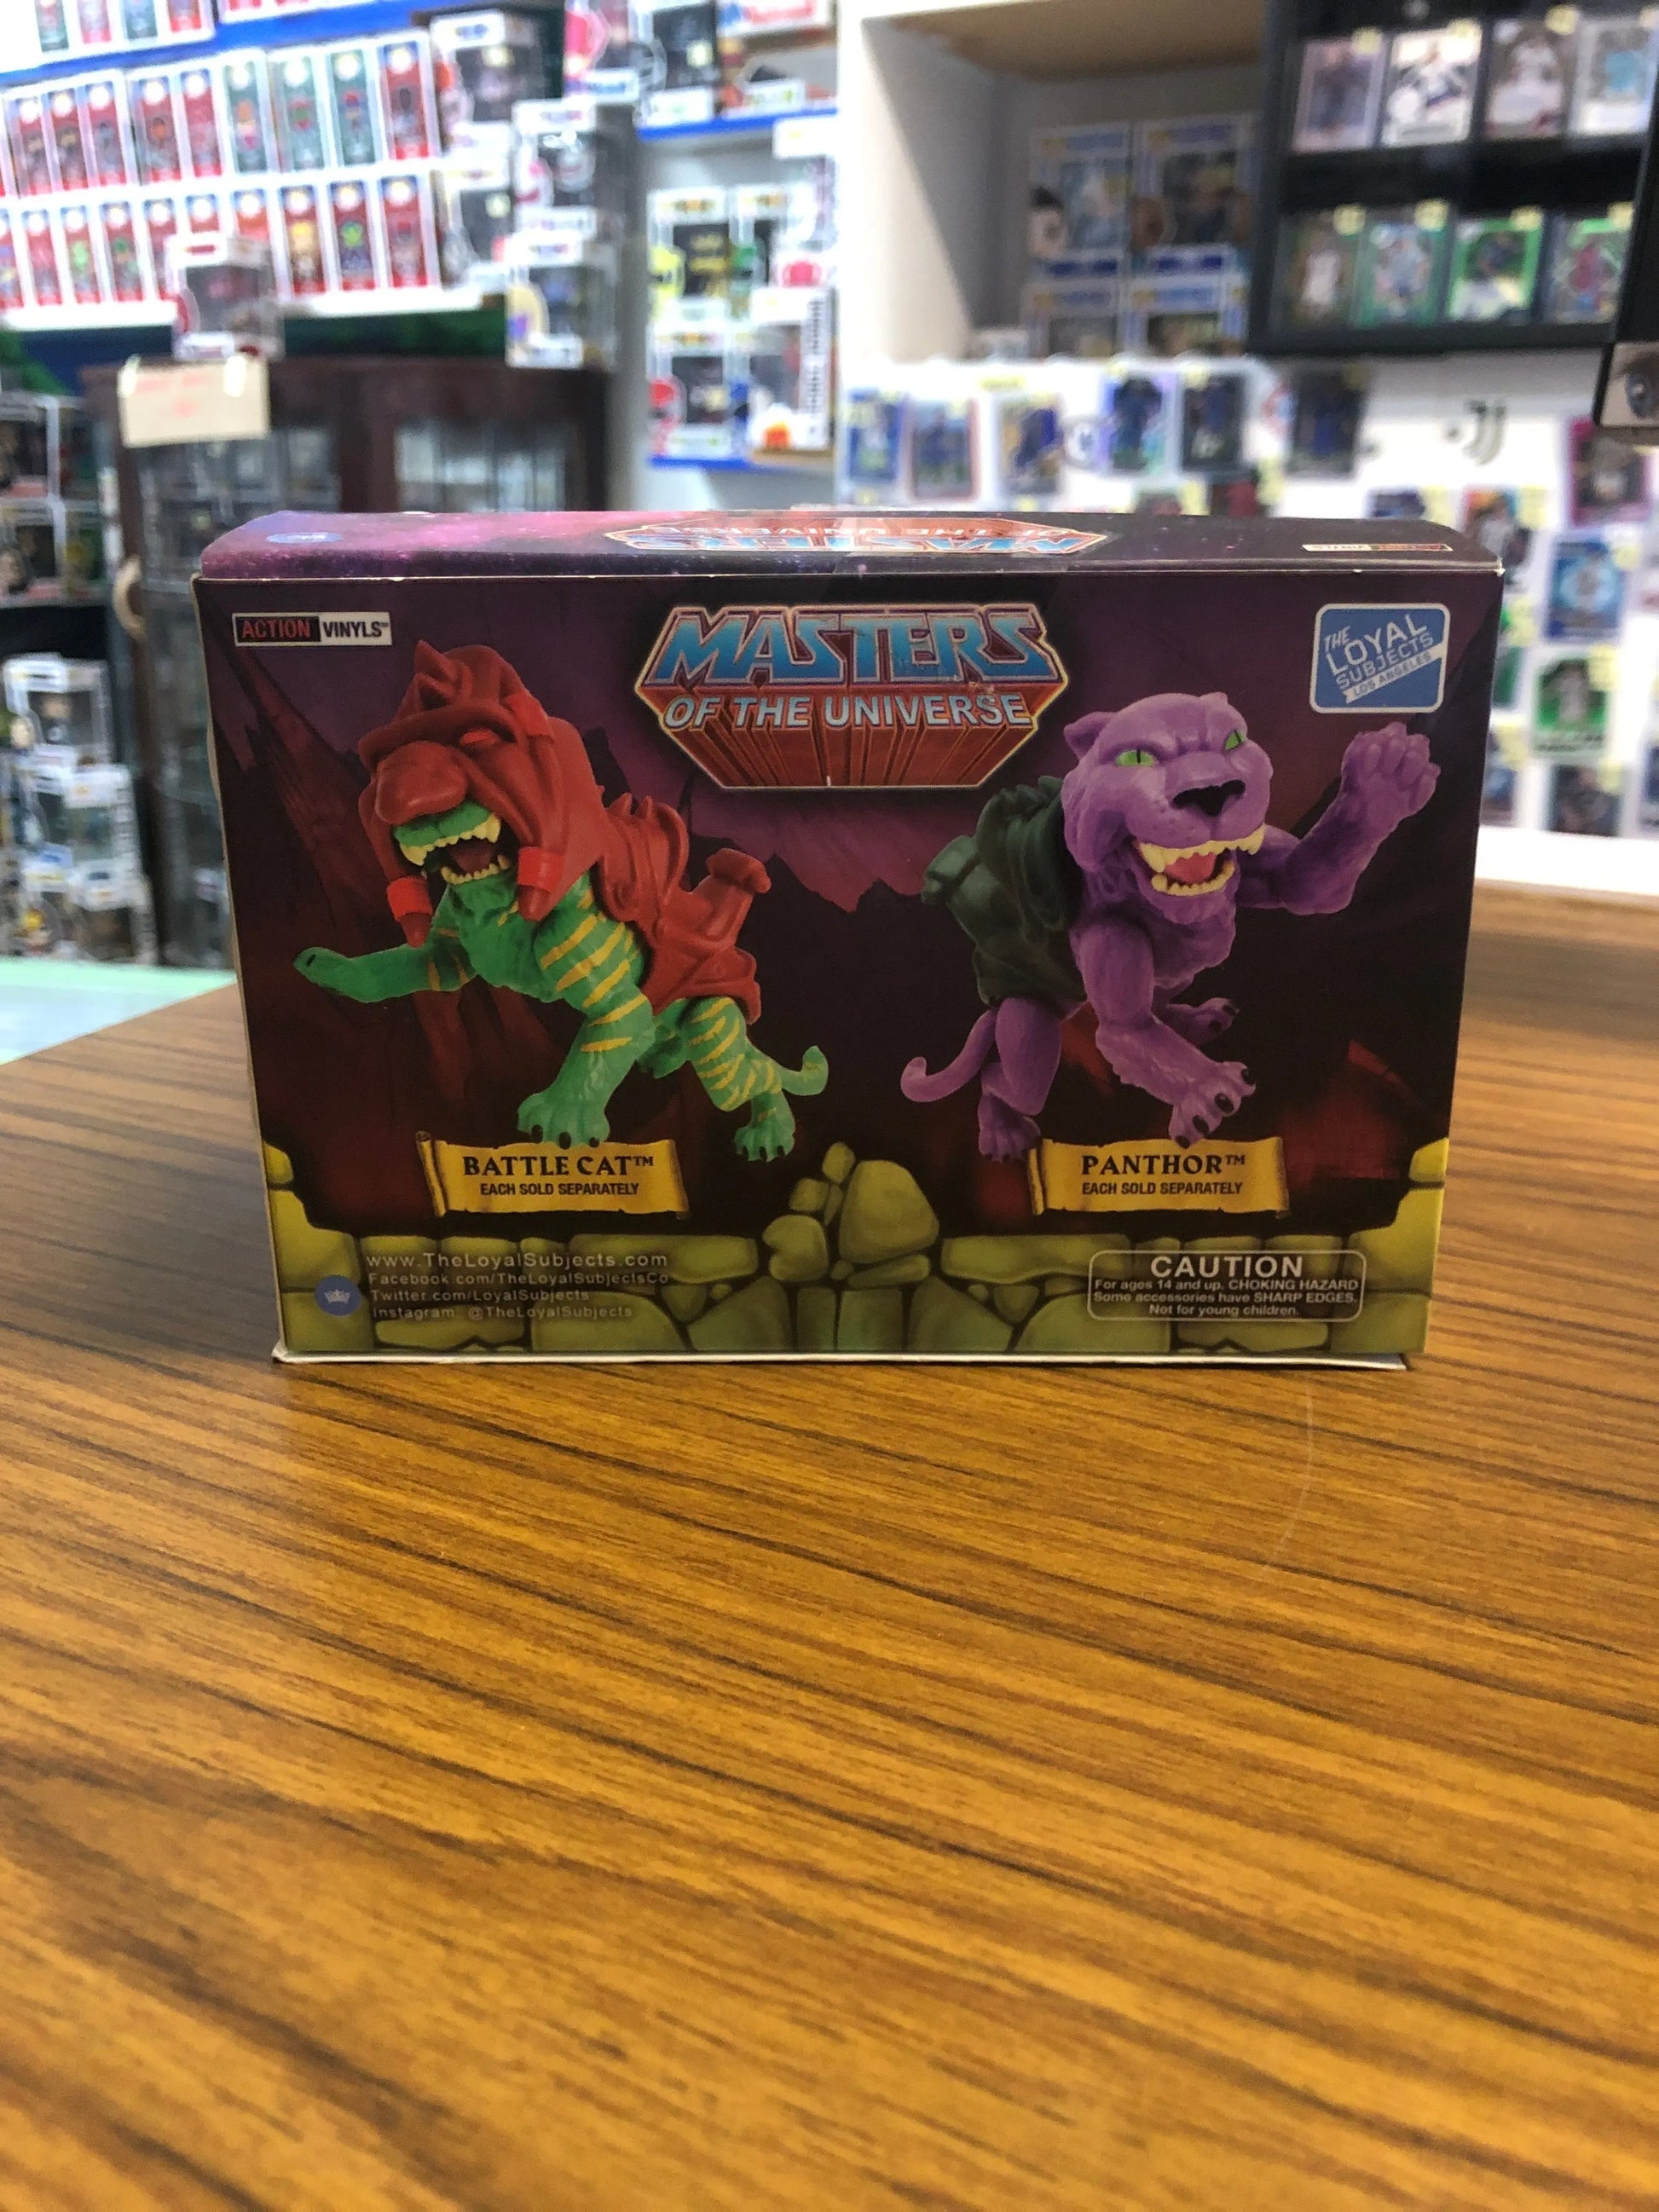 Brand New Sealed Masters of the Universe Battle Cat Loyal Subjects FRENLY BRICKS - Open 7 Days